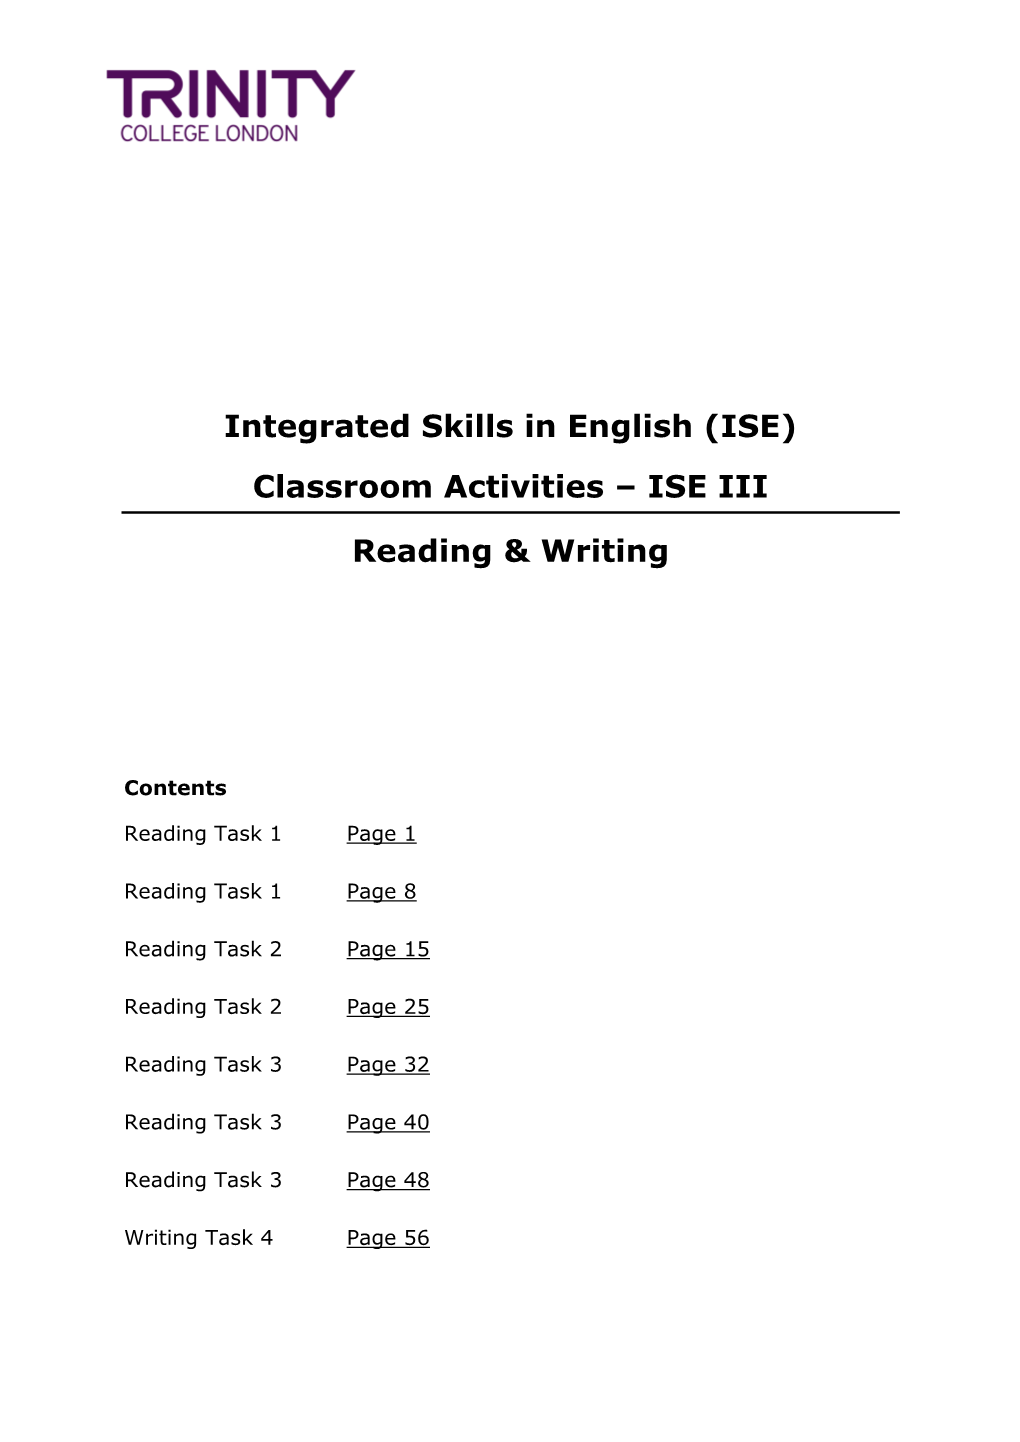 Integrated Skills in English (ISE) Classroom Activities – ISE III Reading & Writing